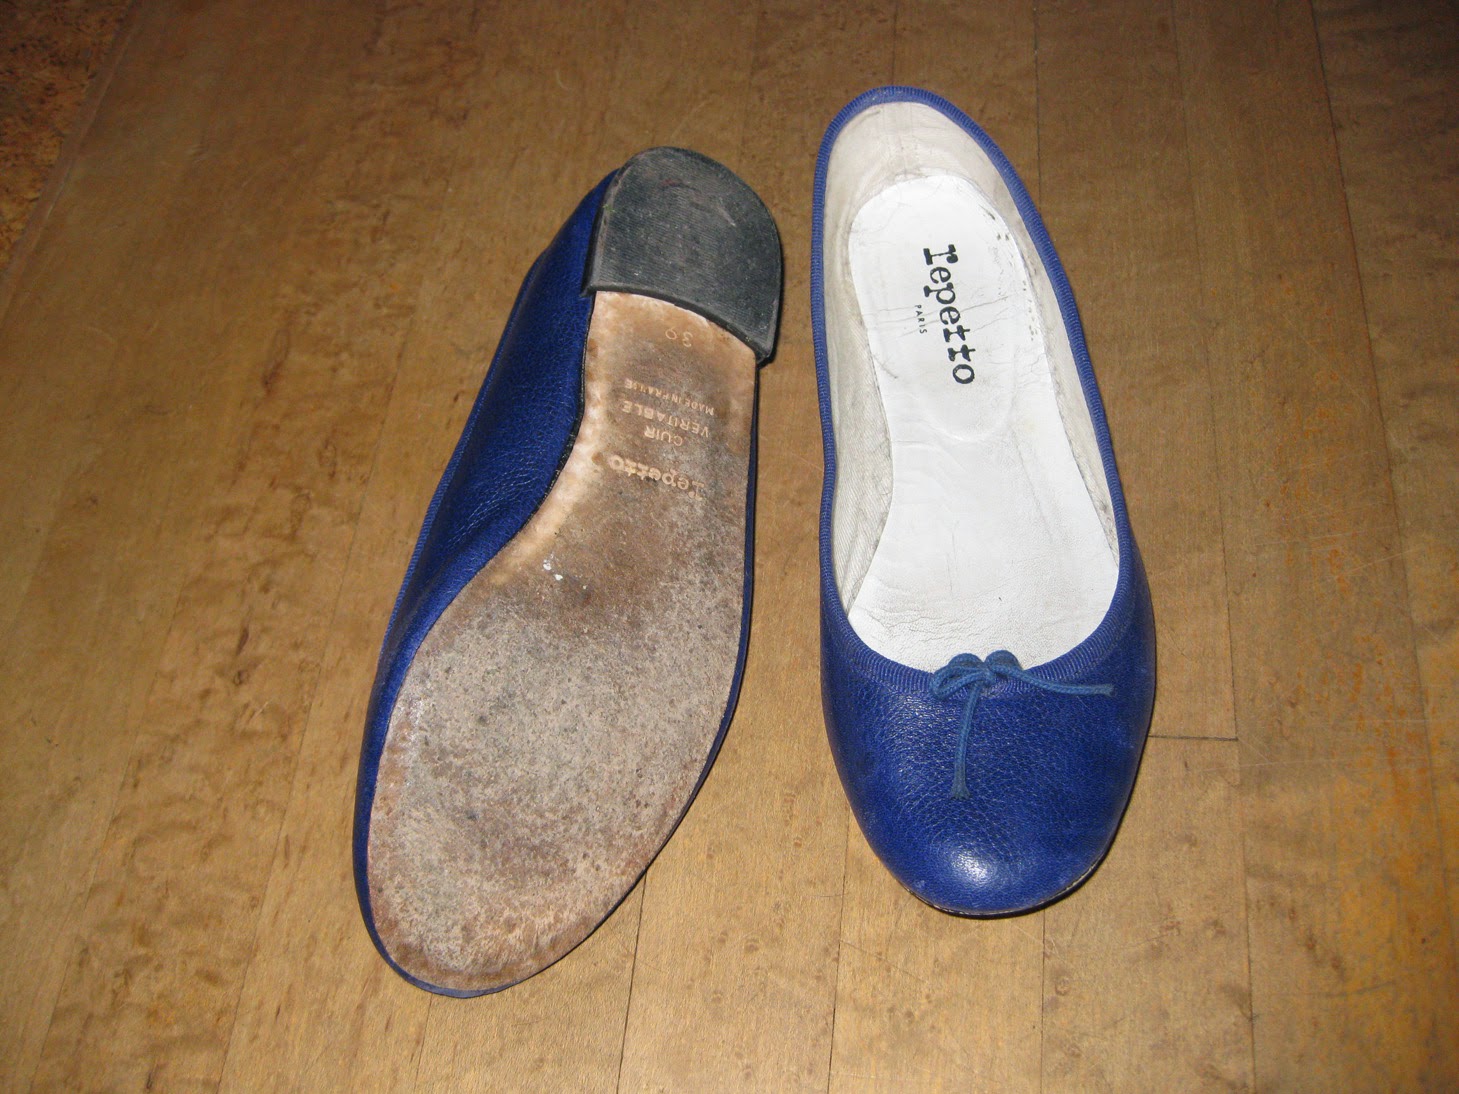 laws of general economy: Blue Repetto BB Ballerina Flats, size 39